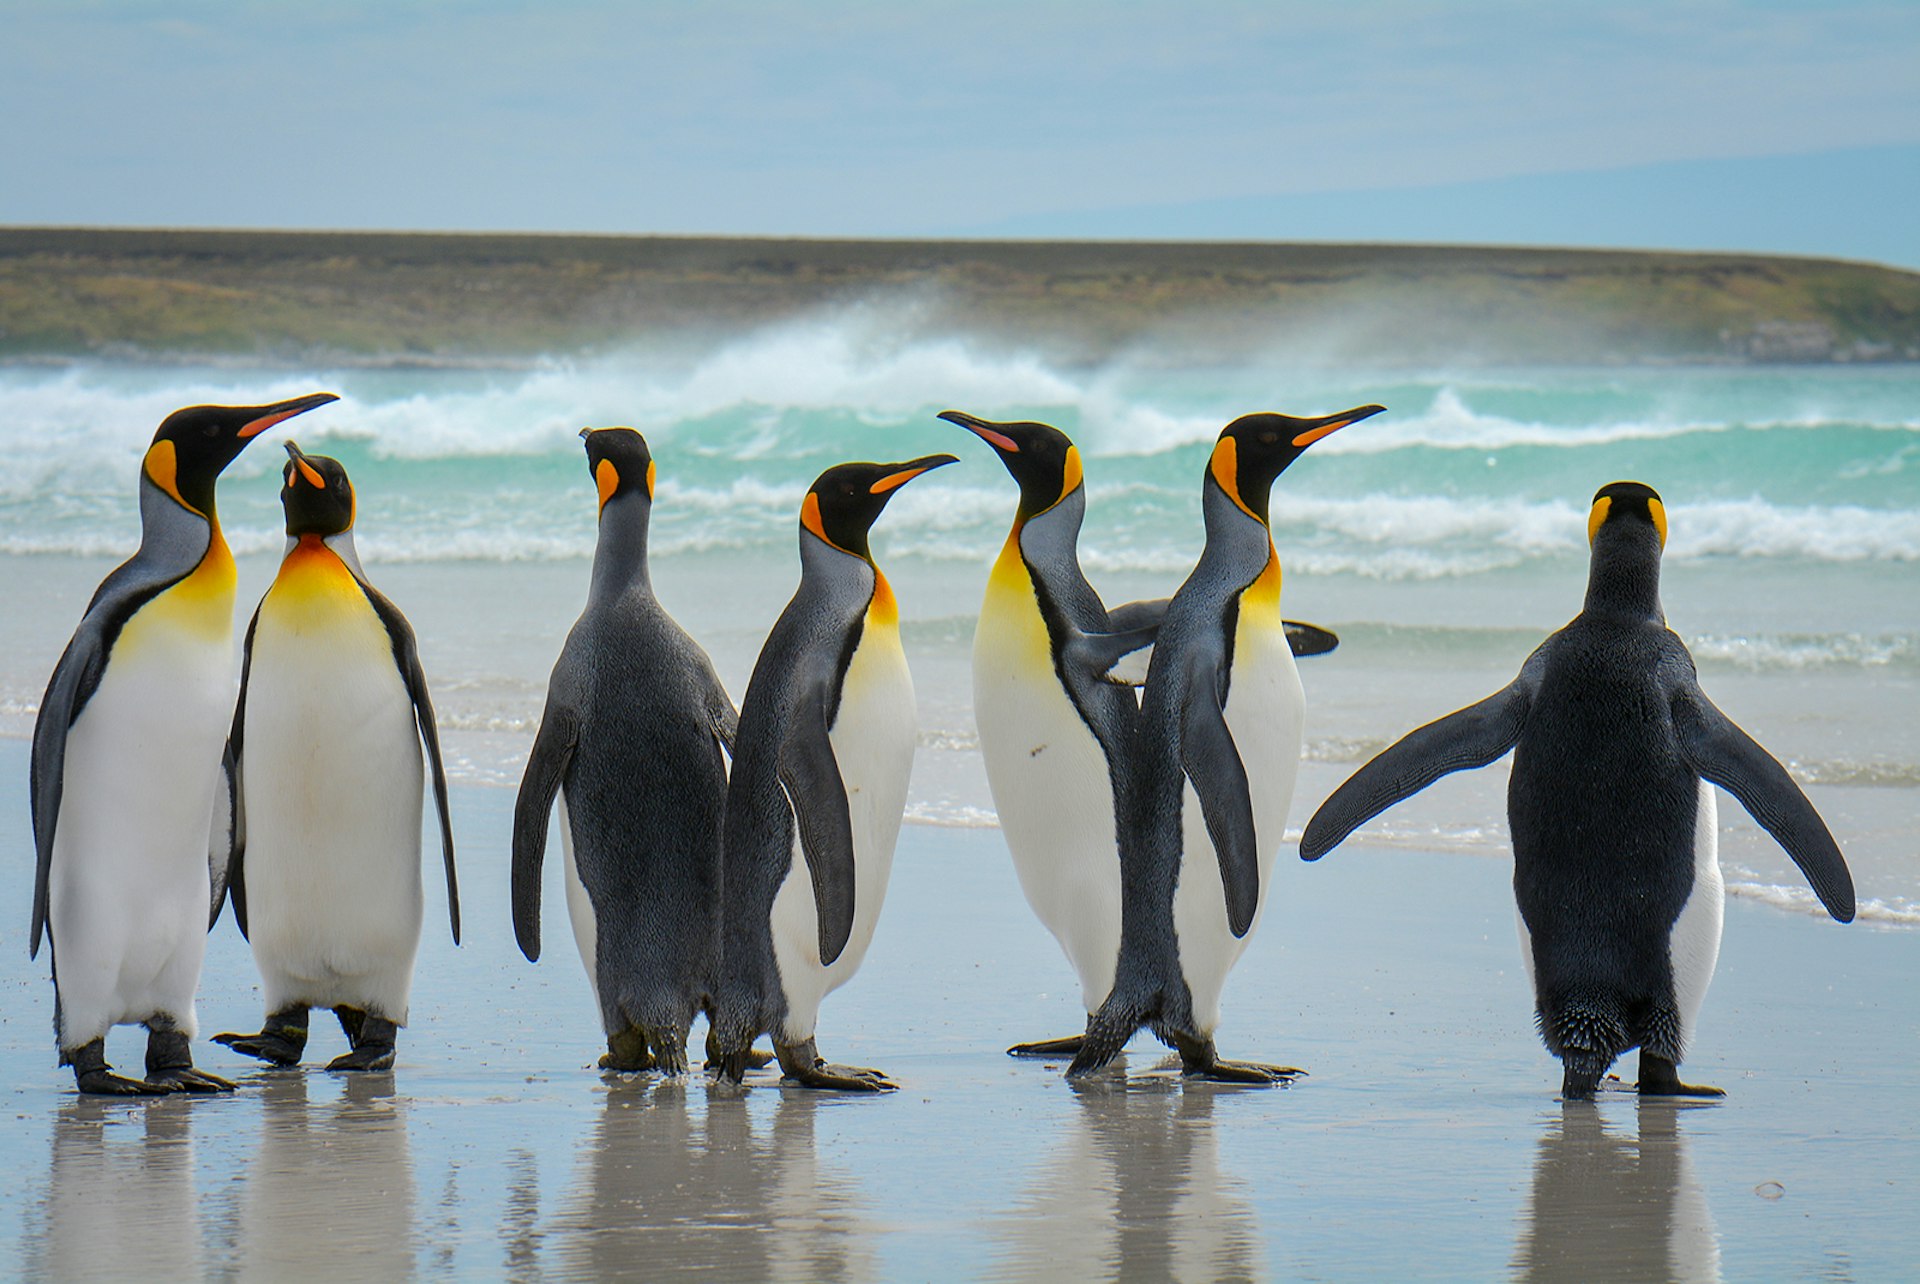 Seven king penguins stand in front of the surf on a beach in the Falkland Islands